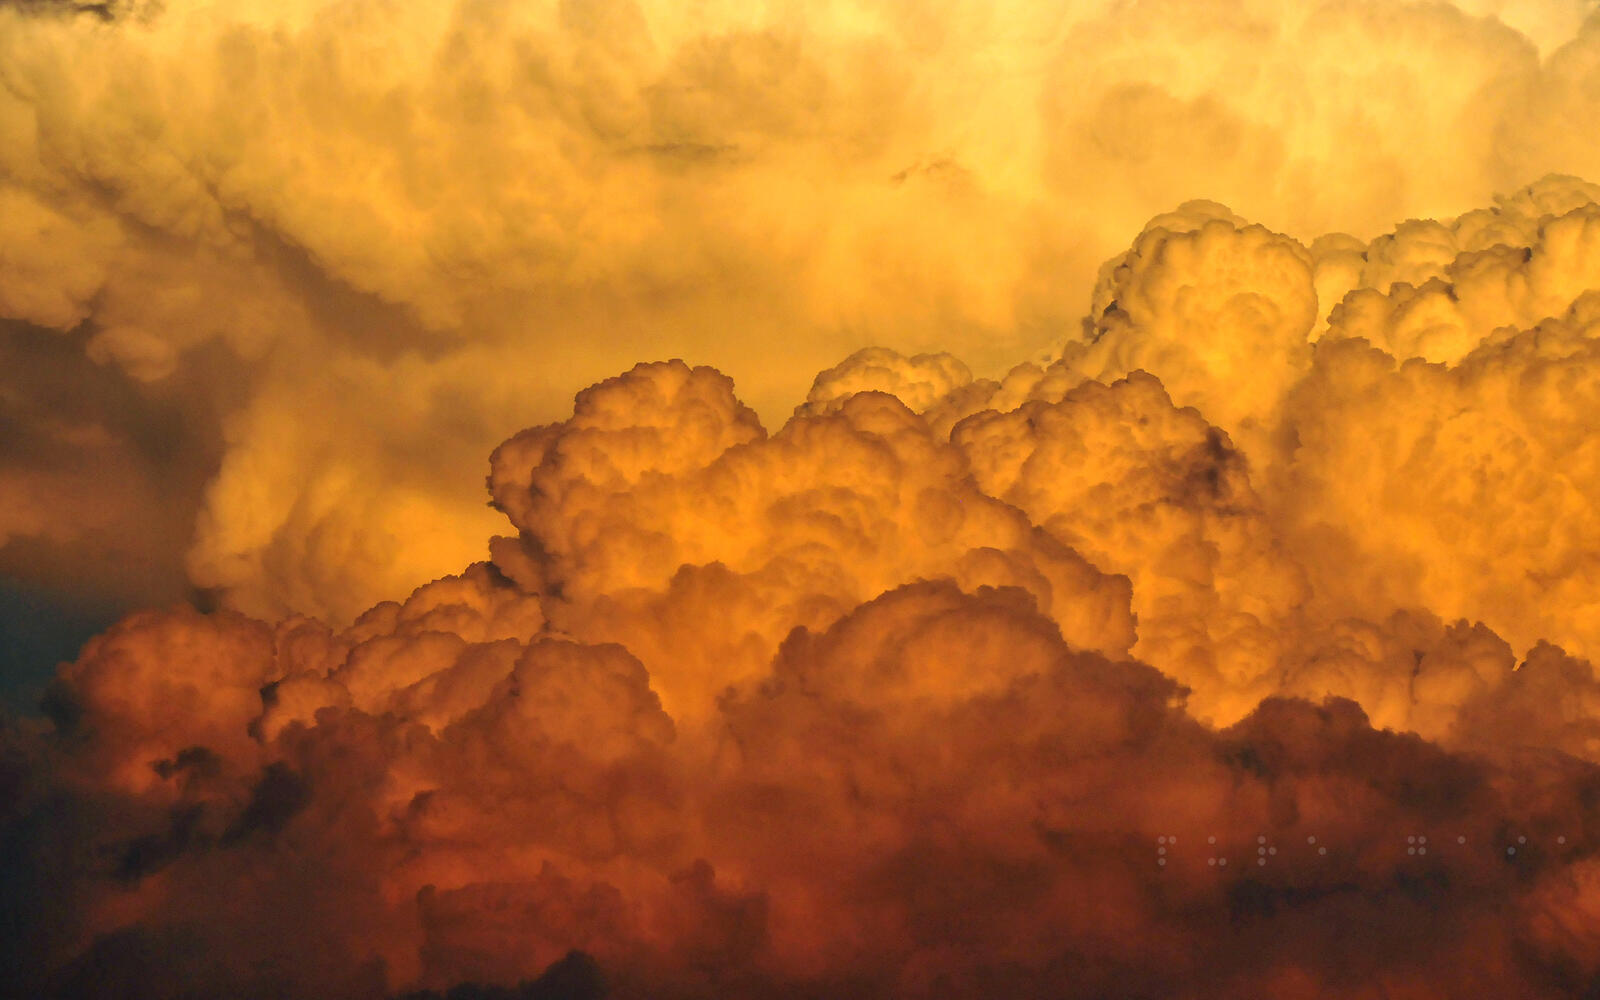 Wallpapers clouds fire yellow on the desktop